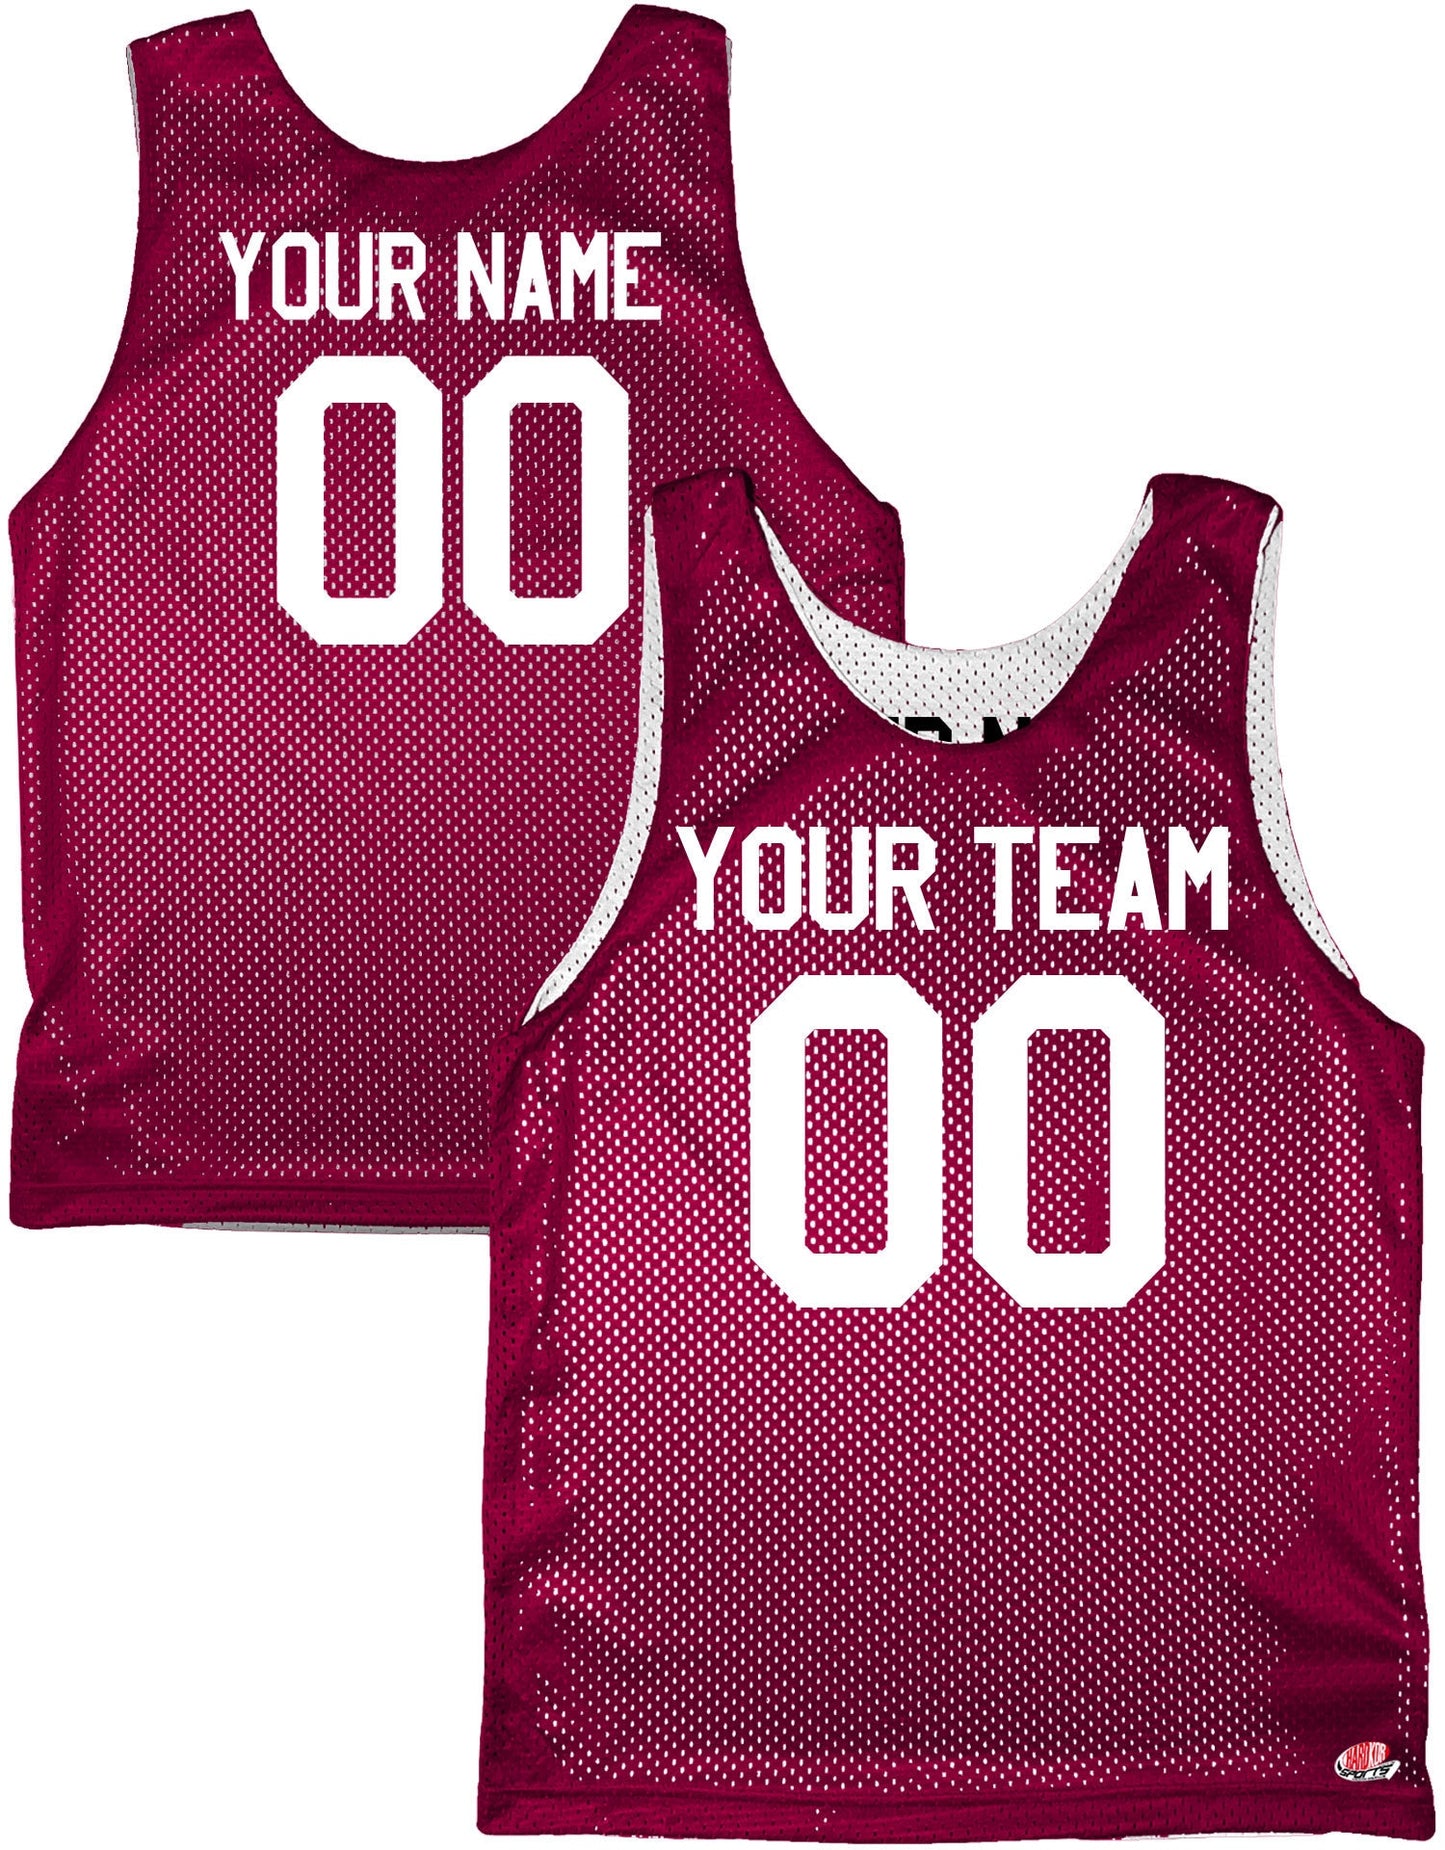 Purple, Cardinal, Maroon, Gold and White | Custom Reversible Basketball Jersey | Tricot Mesh.  Team, Player Name, Numbers on Both Sides